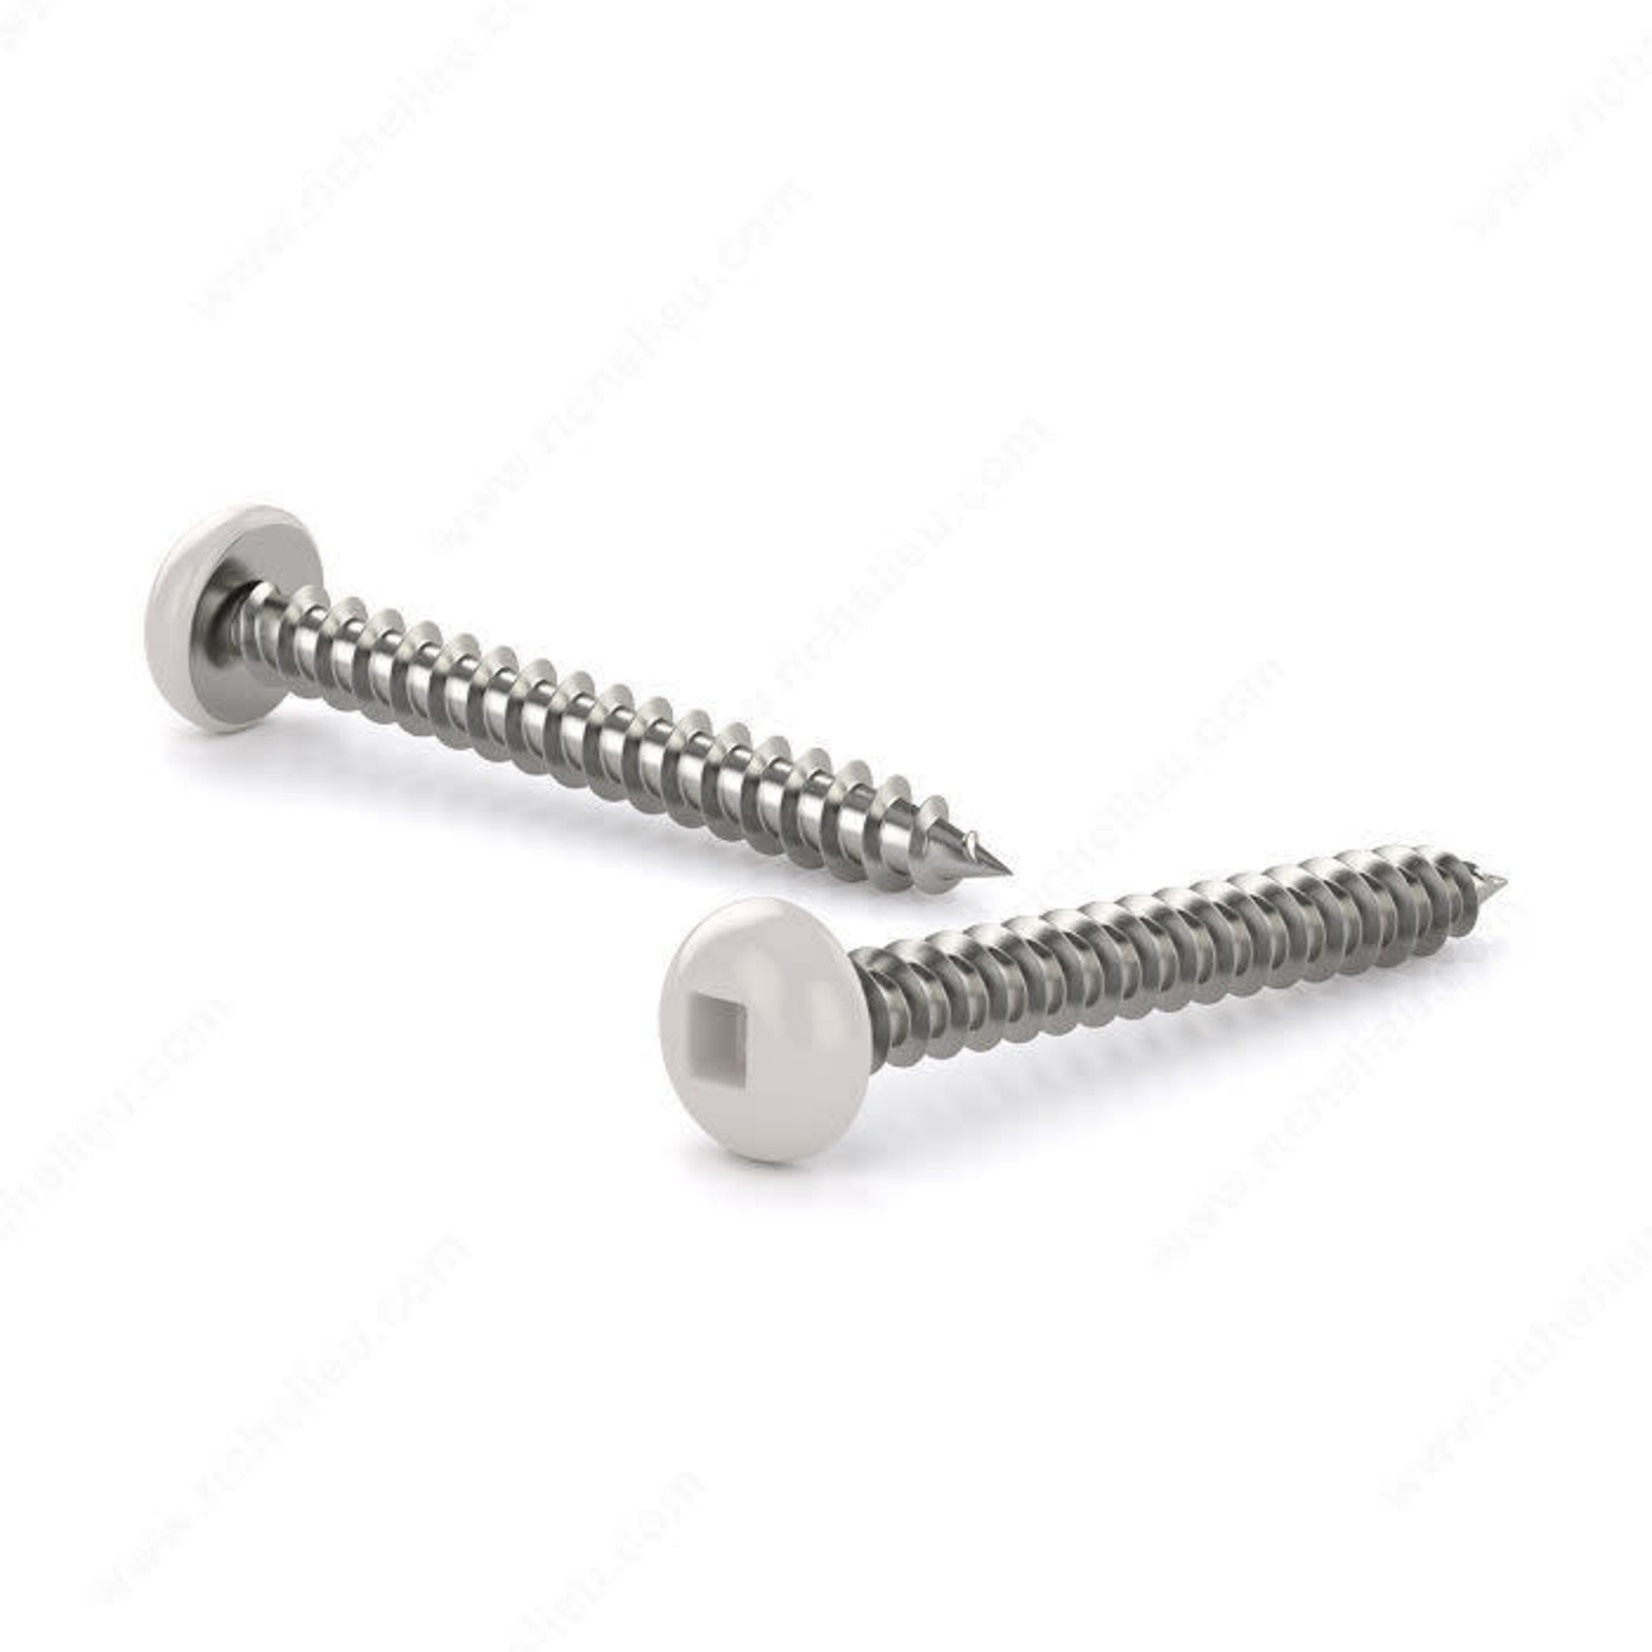 RELIABLE METAL SCREW, PAN HEAD COLORED WHITE, #8 1-1/2IN, 7PK BLISTER